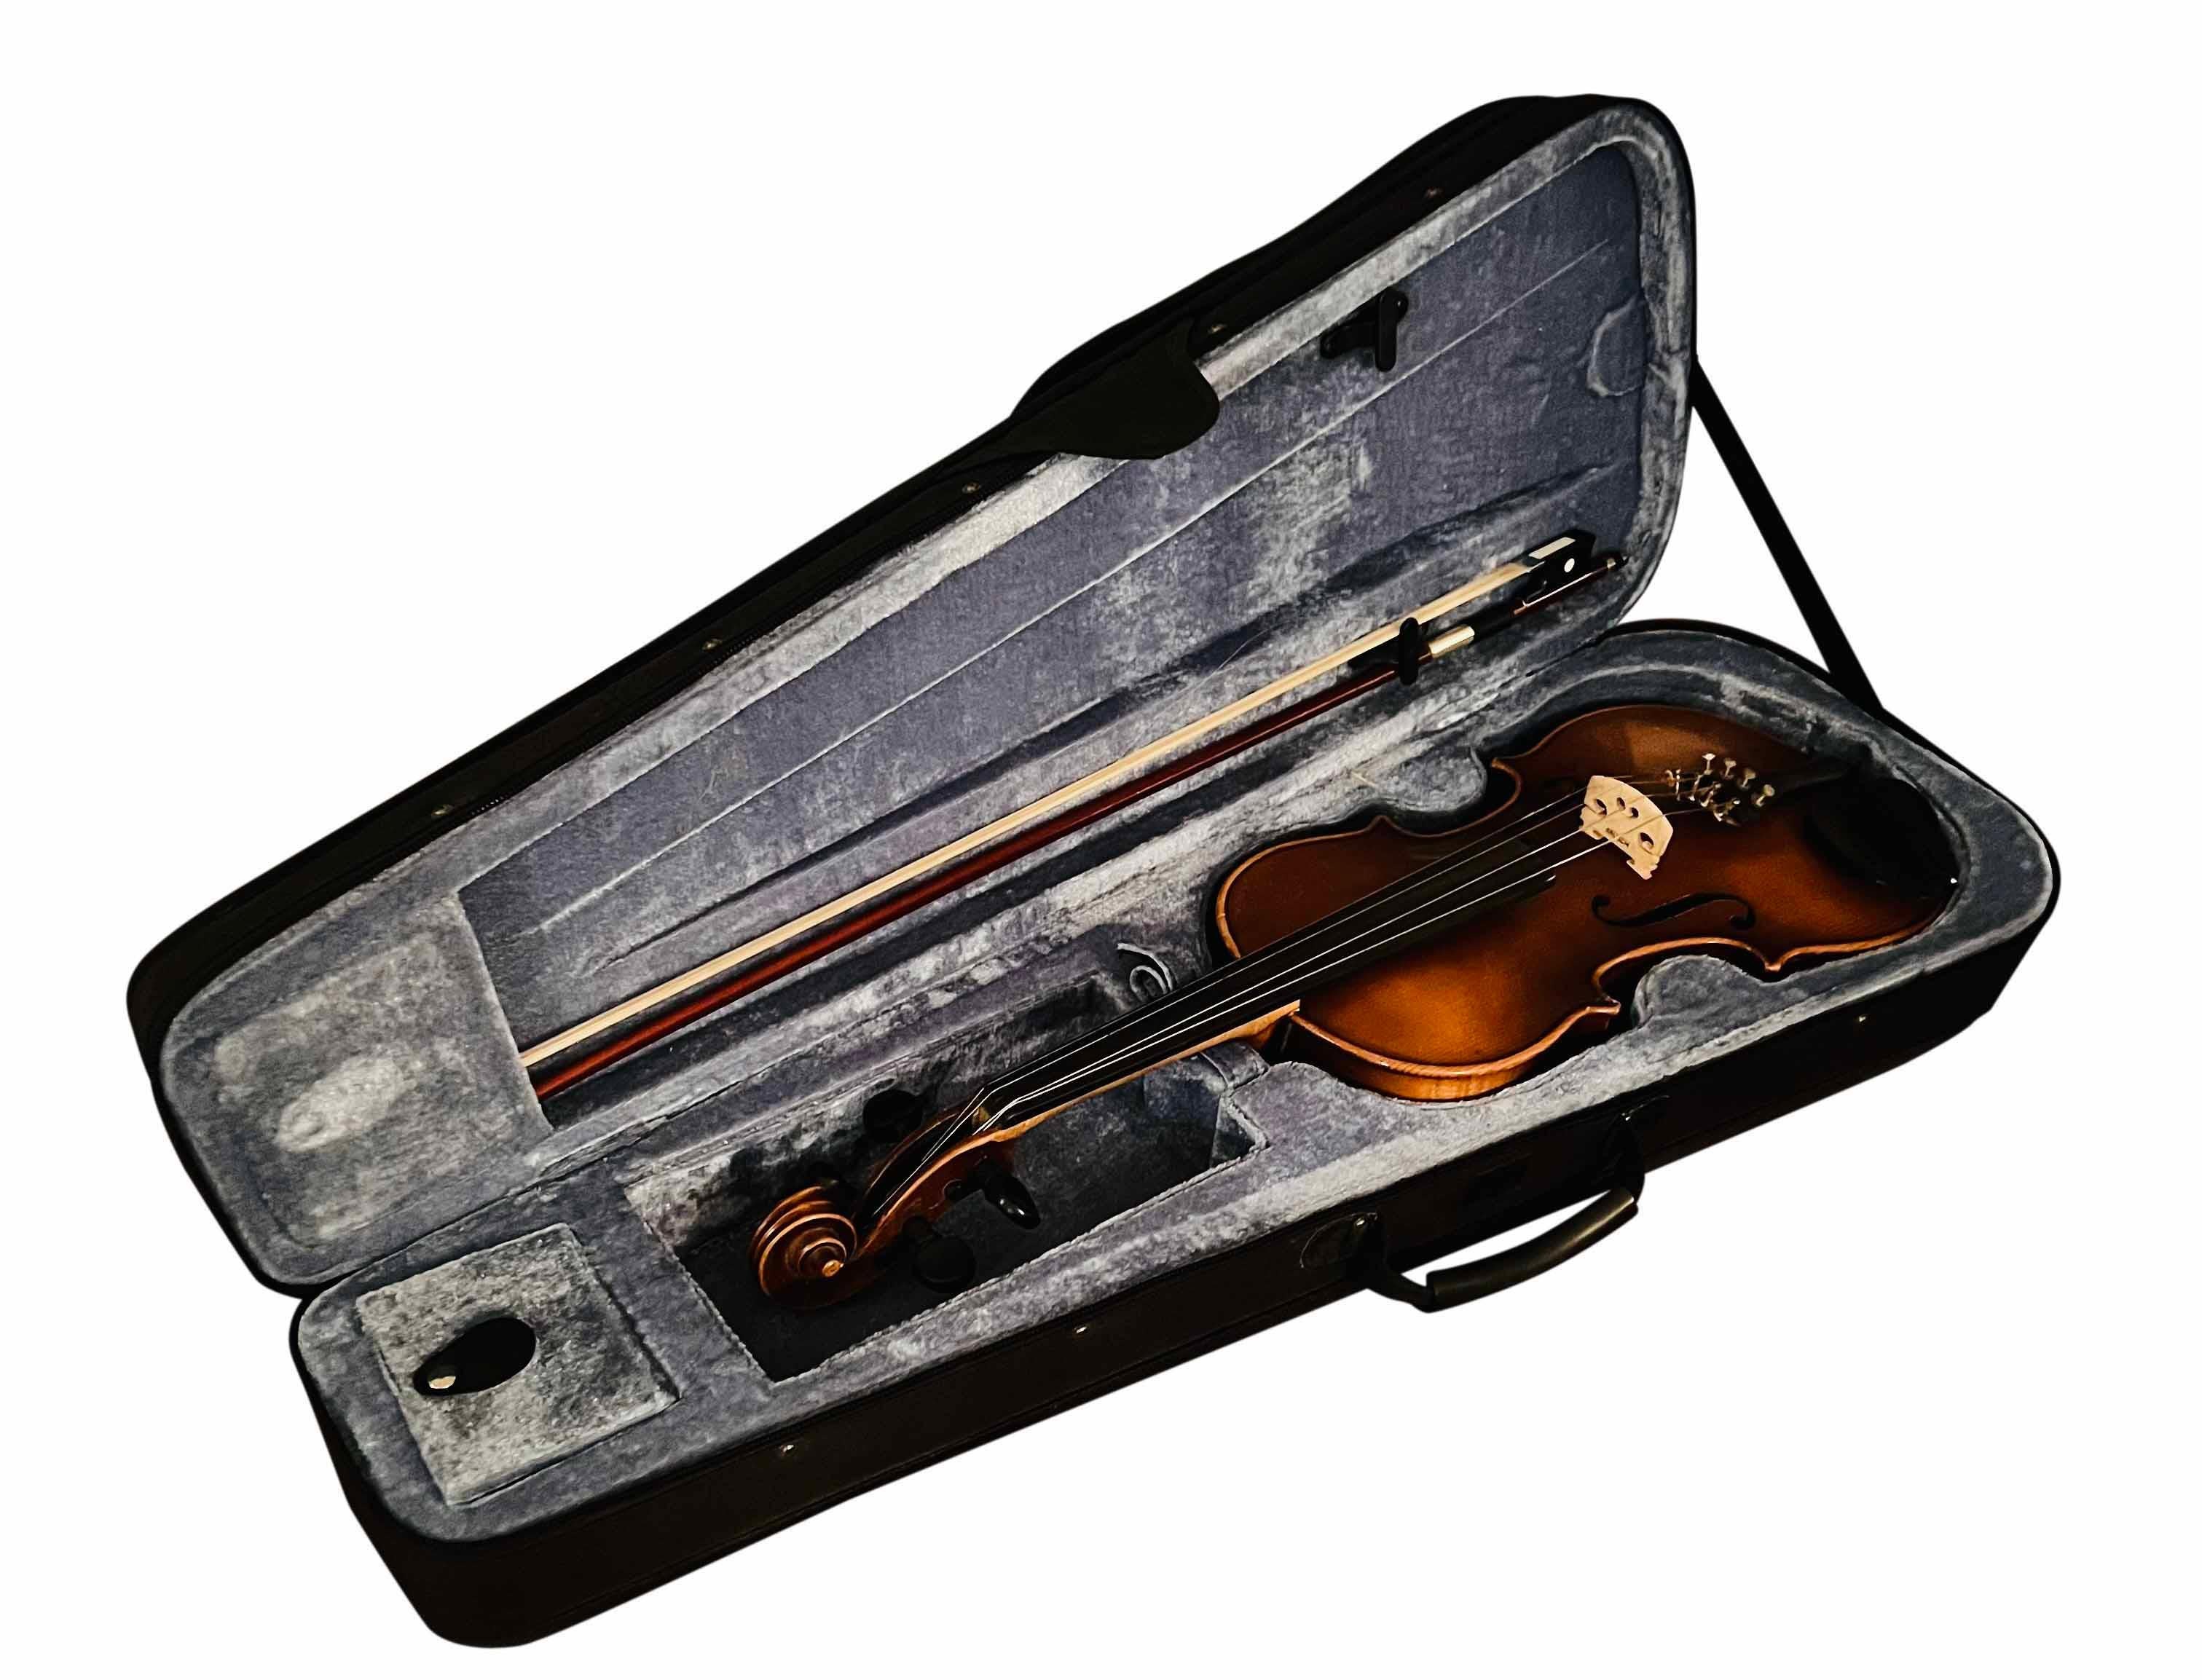 1970 3/4 E.R. Pfretzschner Hand-Crafted Violin in the Style of A. Stradivarius im Angebot 7